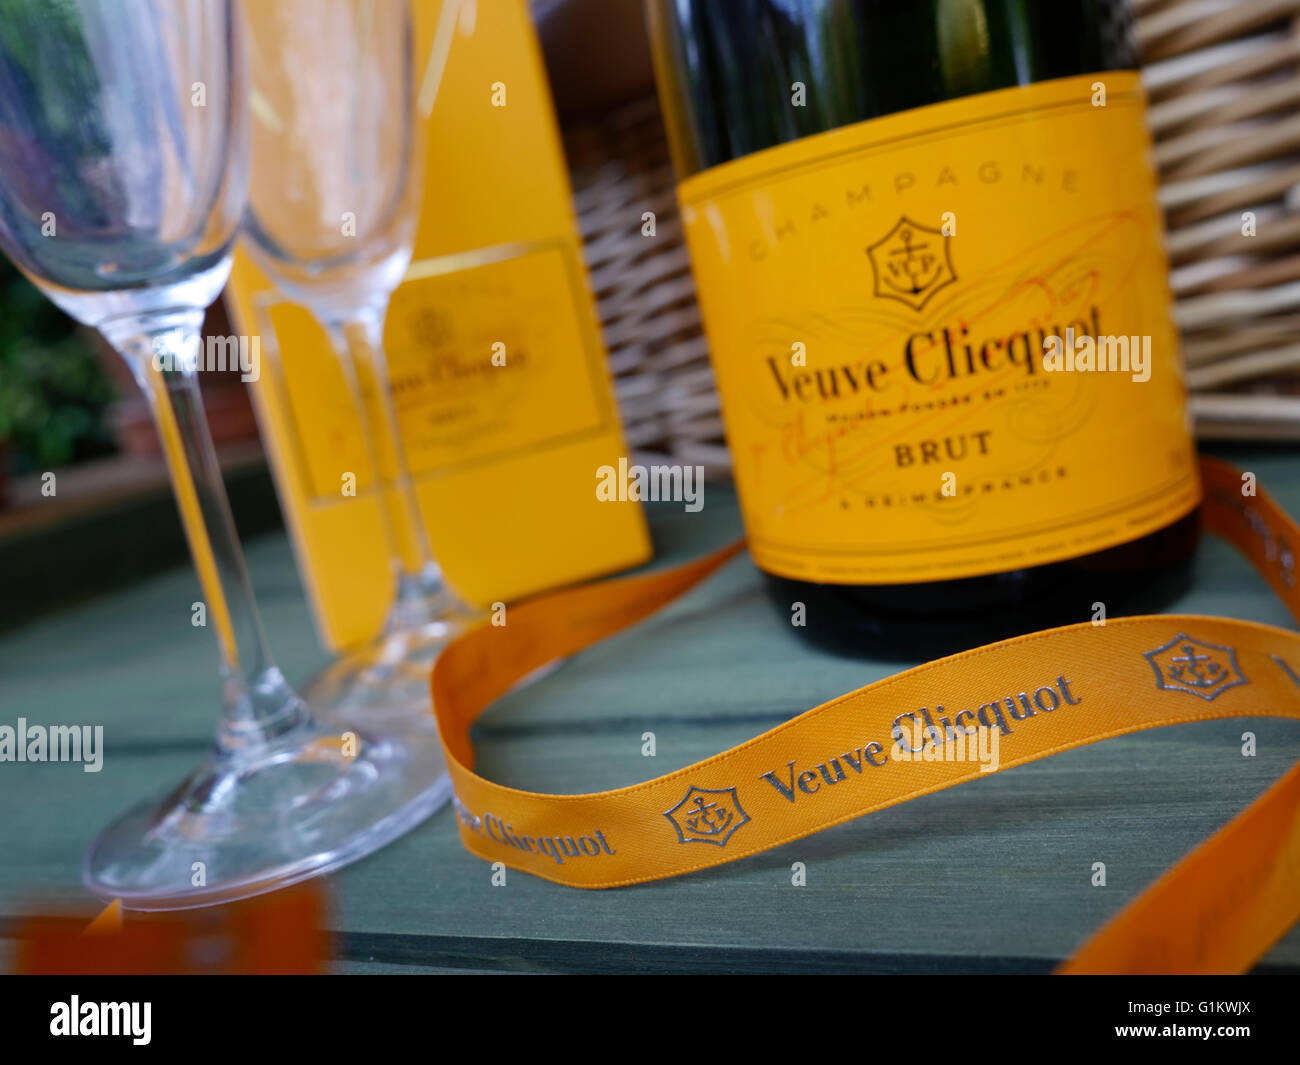 Veuve Clicquot Brut luxury Champagne and glasses on alfresco garden picnic table with picnic hamper basket behind Stock Photo